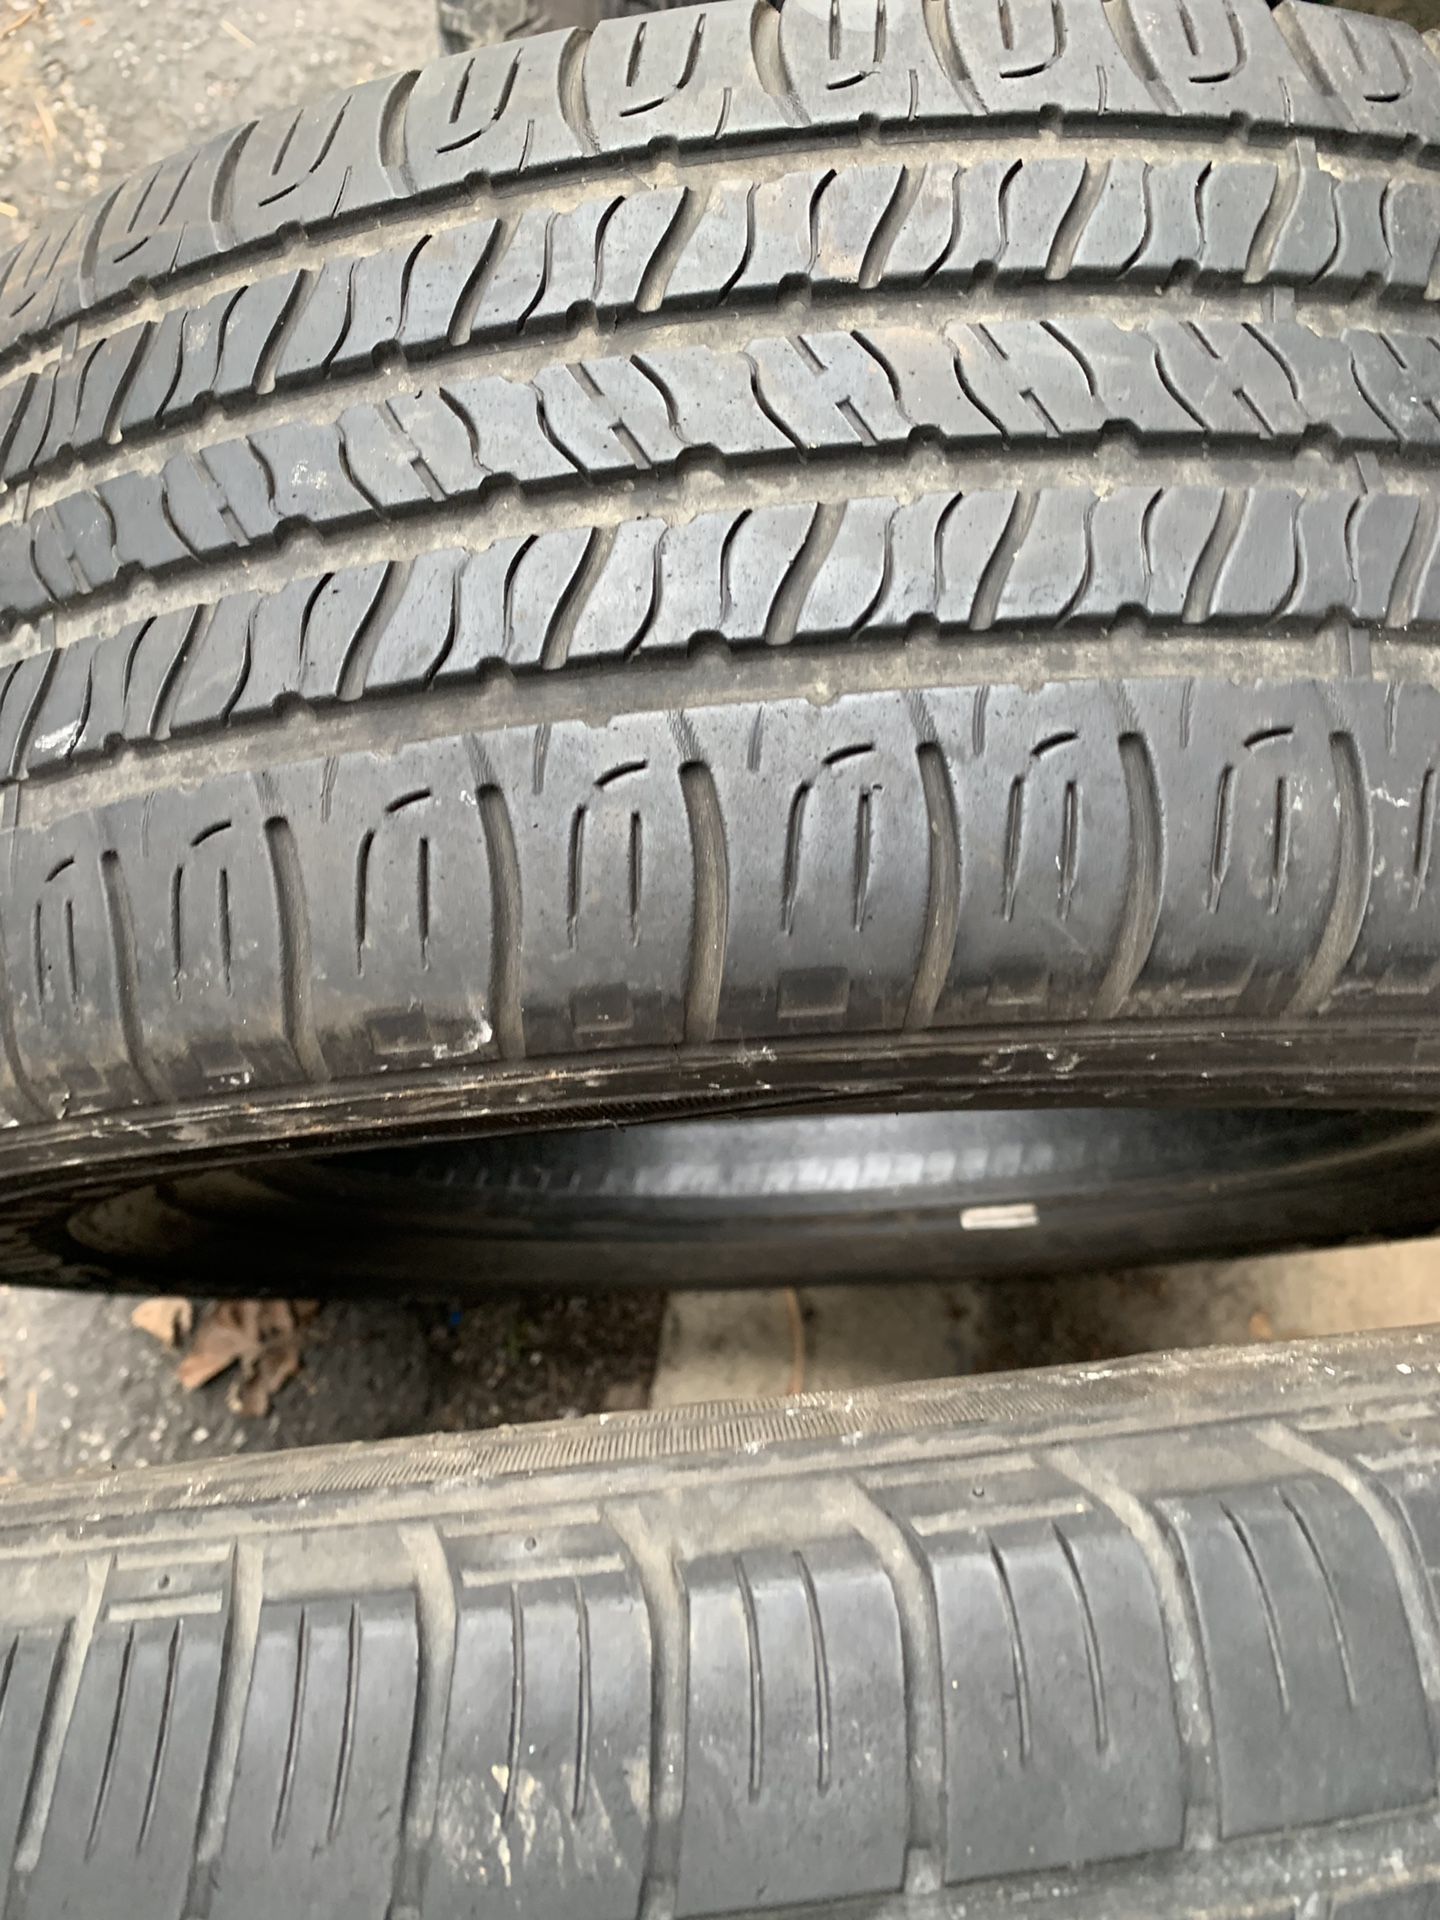 275/55/ 20. Set of 2. Used tires.